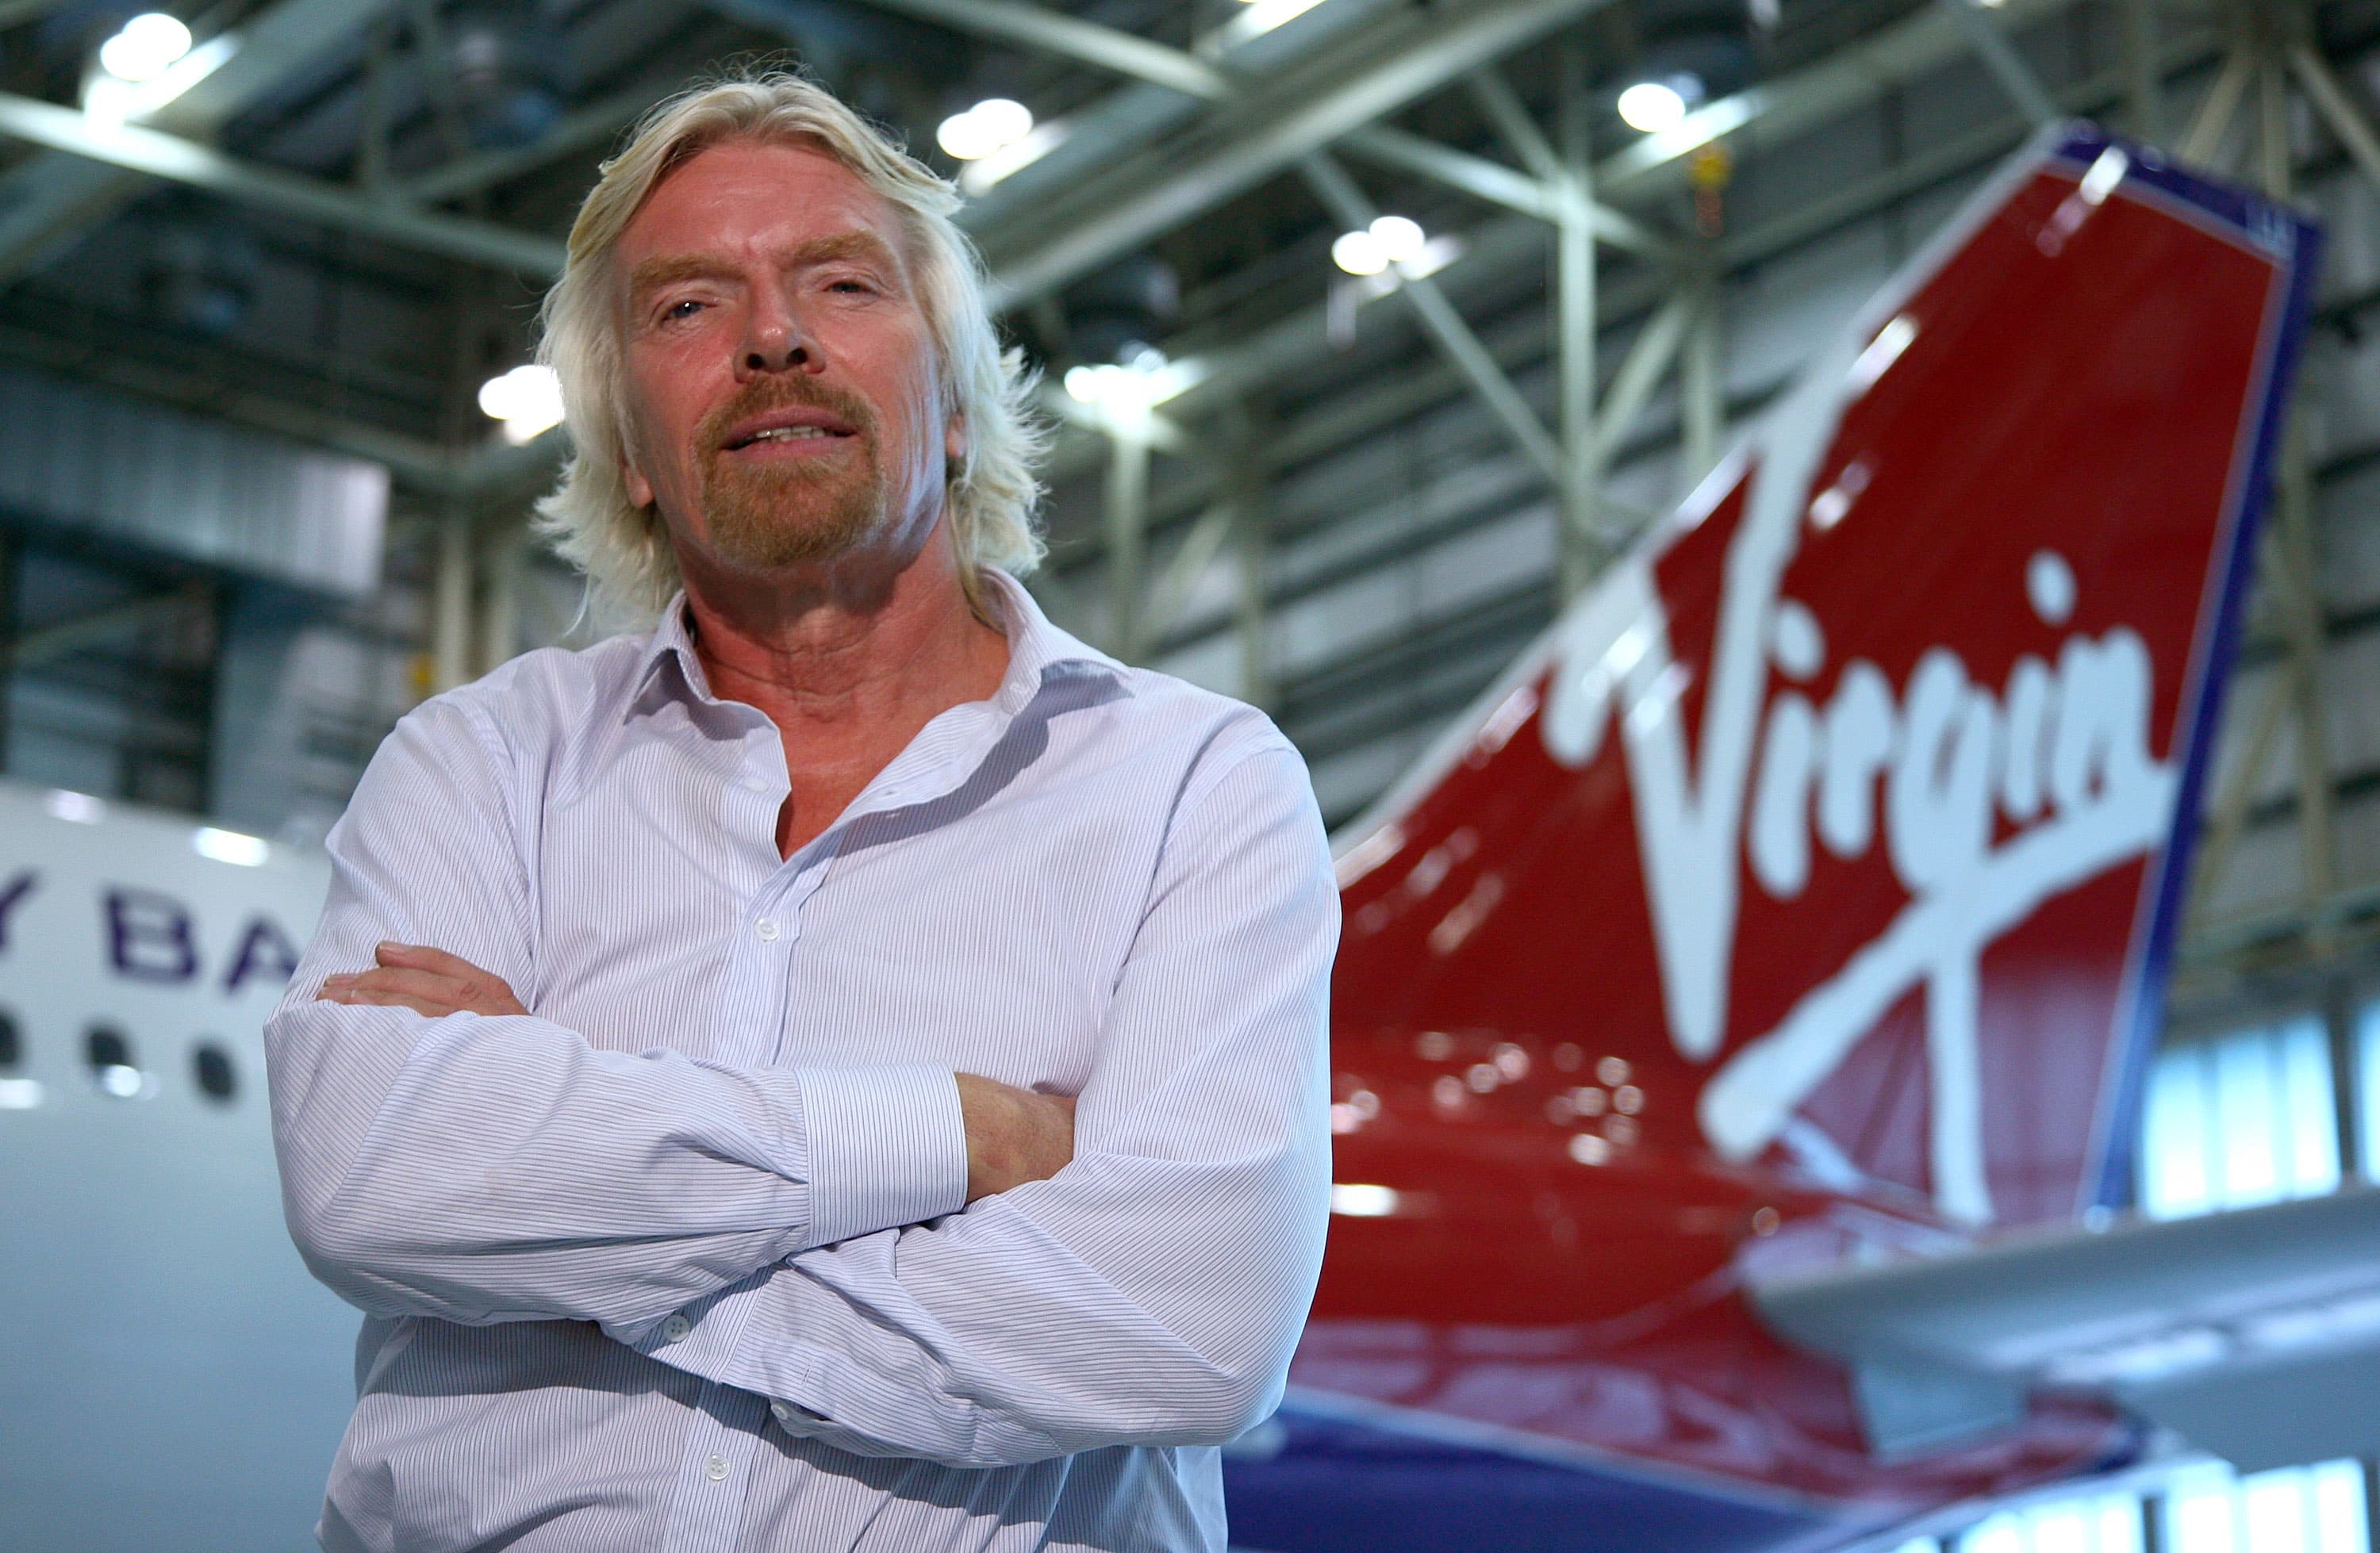 Richard Branson is the richest person in the world with disabilities